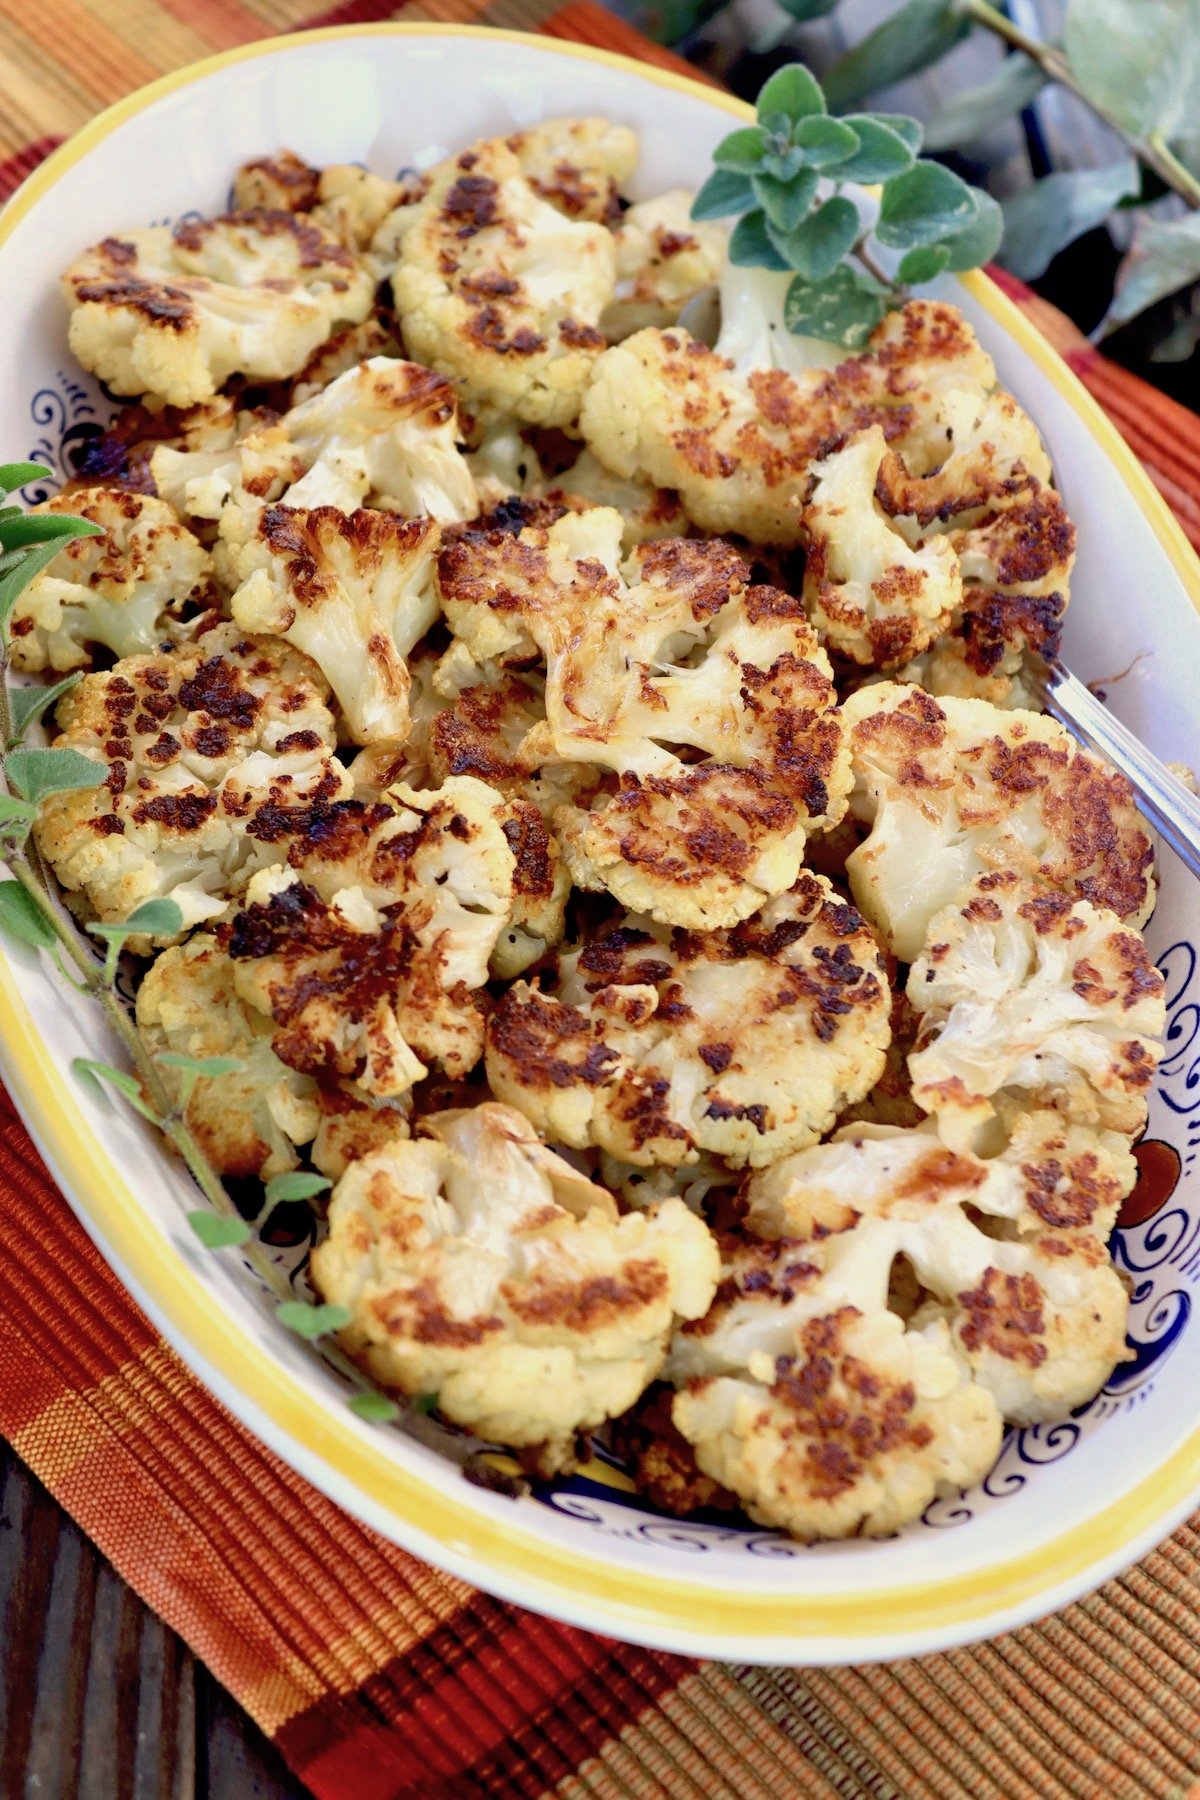 Yellow-rimmed dish with golden-brown cauliflower florets.